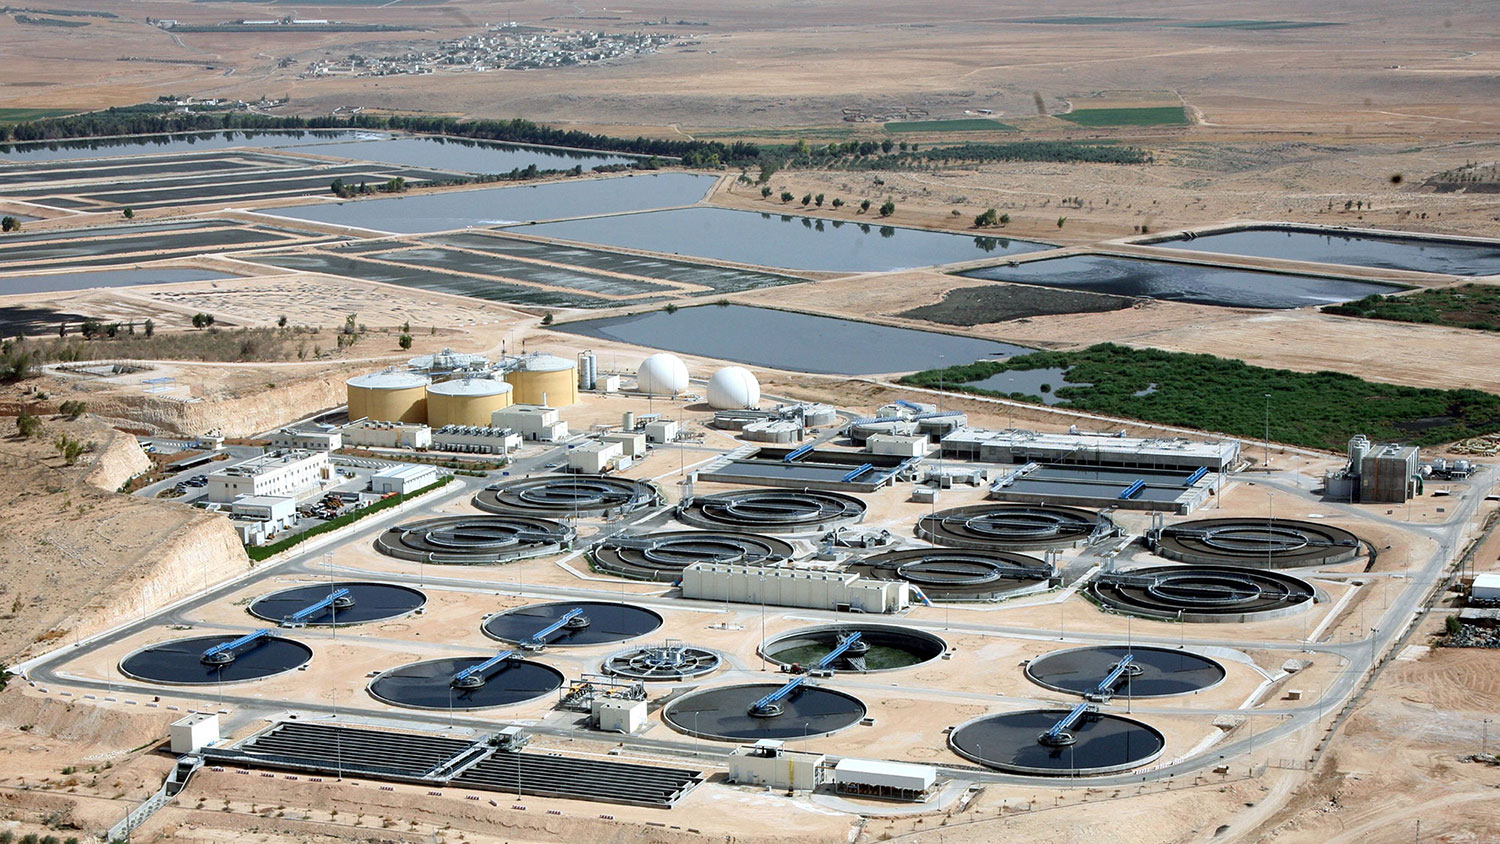 As Samra wastewater and biosolids treatment and reuse